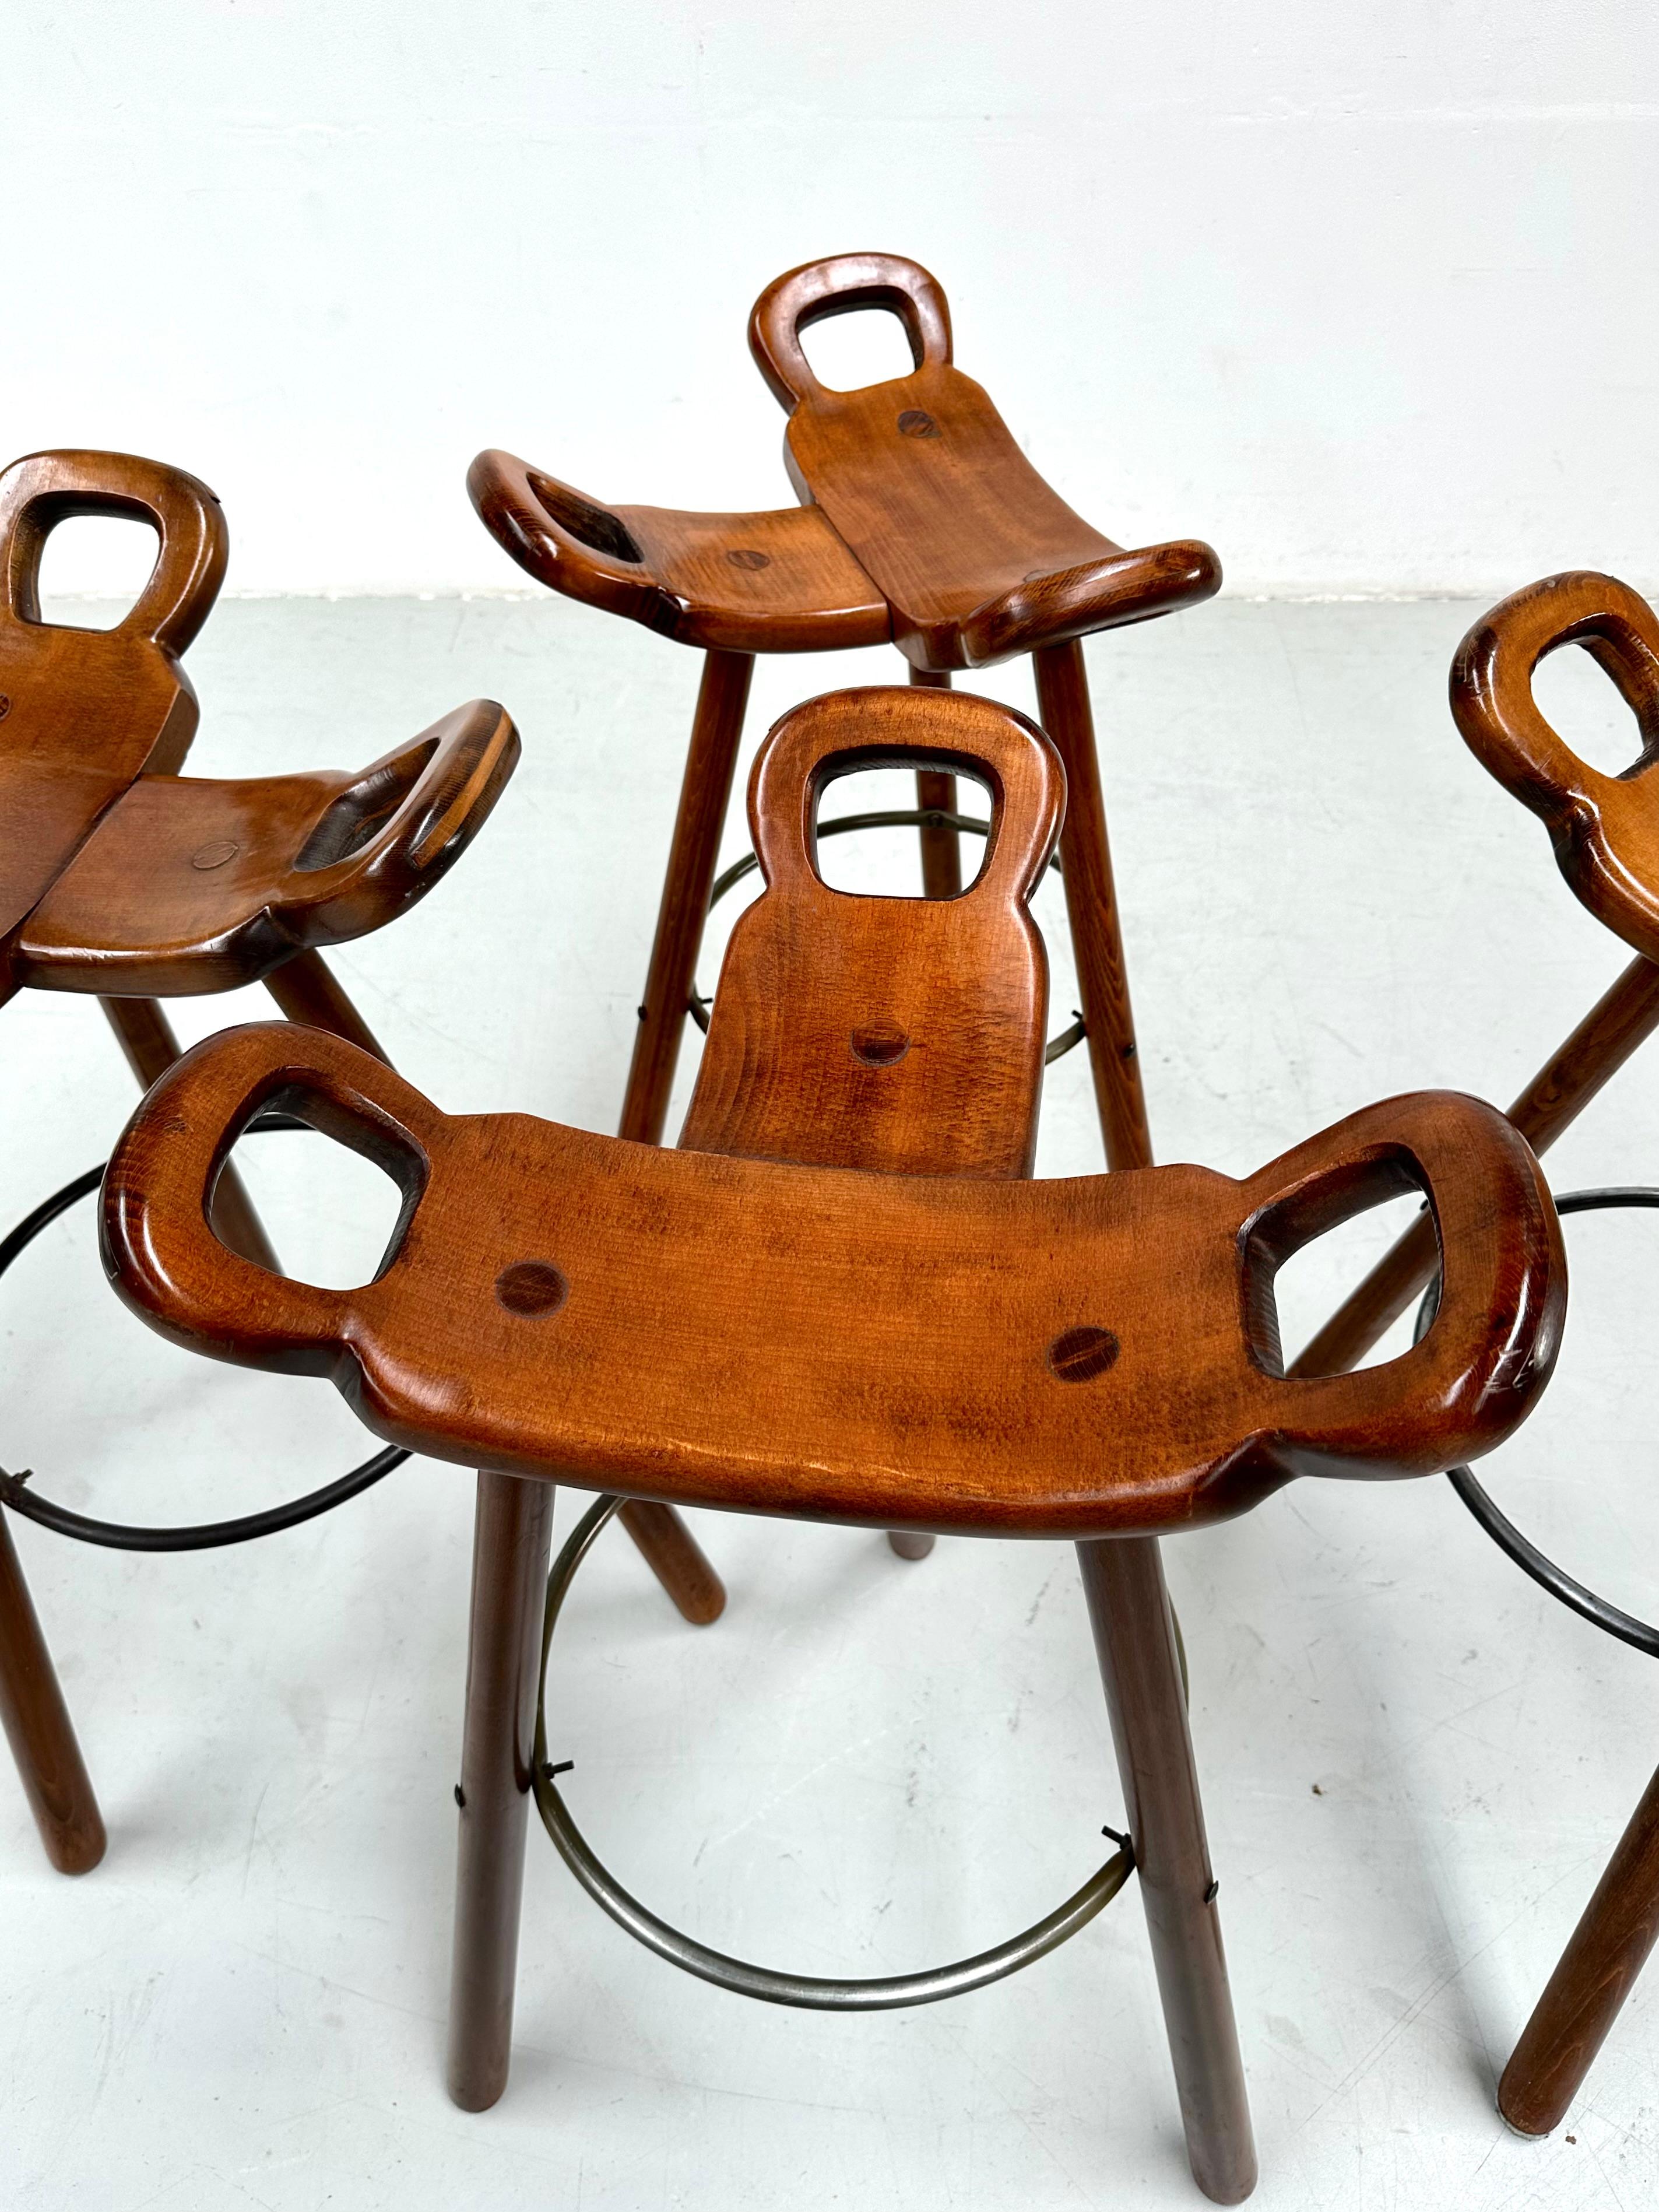 Mid-Century Modern Set of 4 Marbella Brutalist Stools by Sergio Rodrigues for Confonorm 1970s.